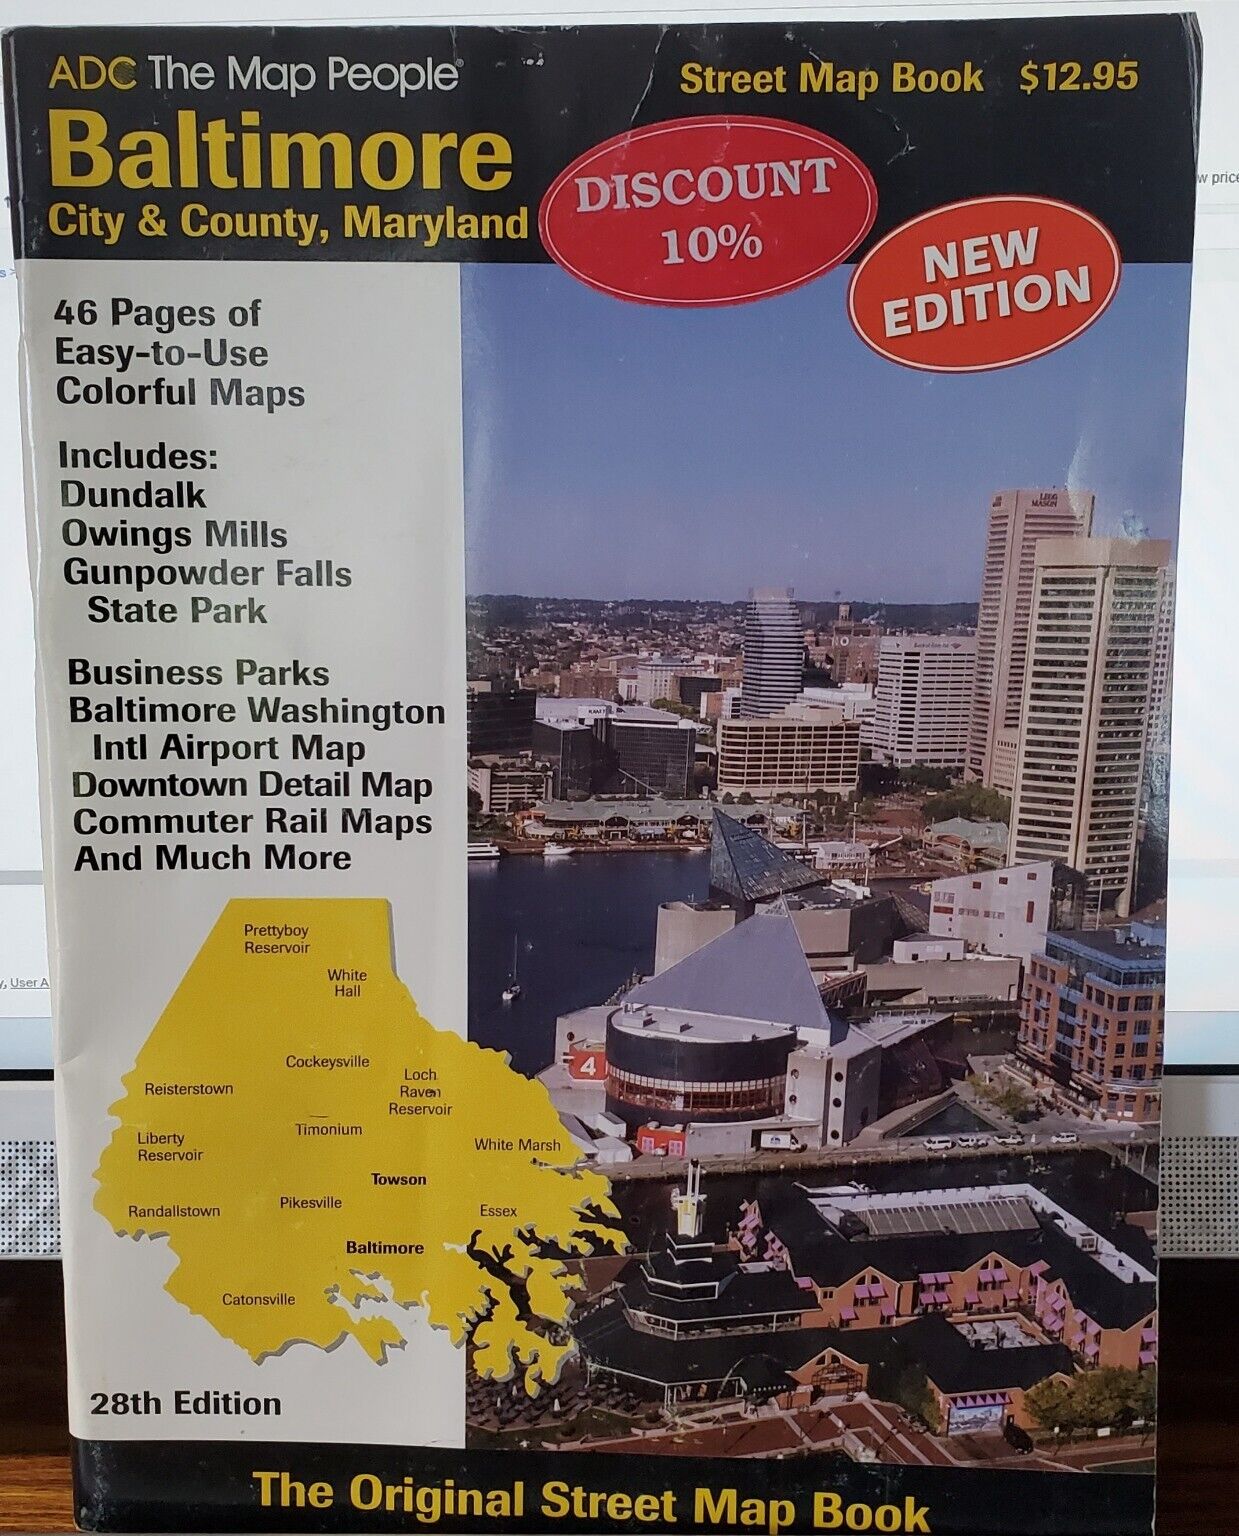 ADC Street Map Book Baltimore City & County, Maryland 28th ed. 2007